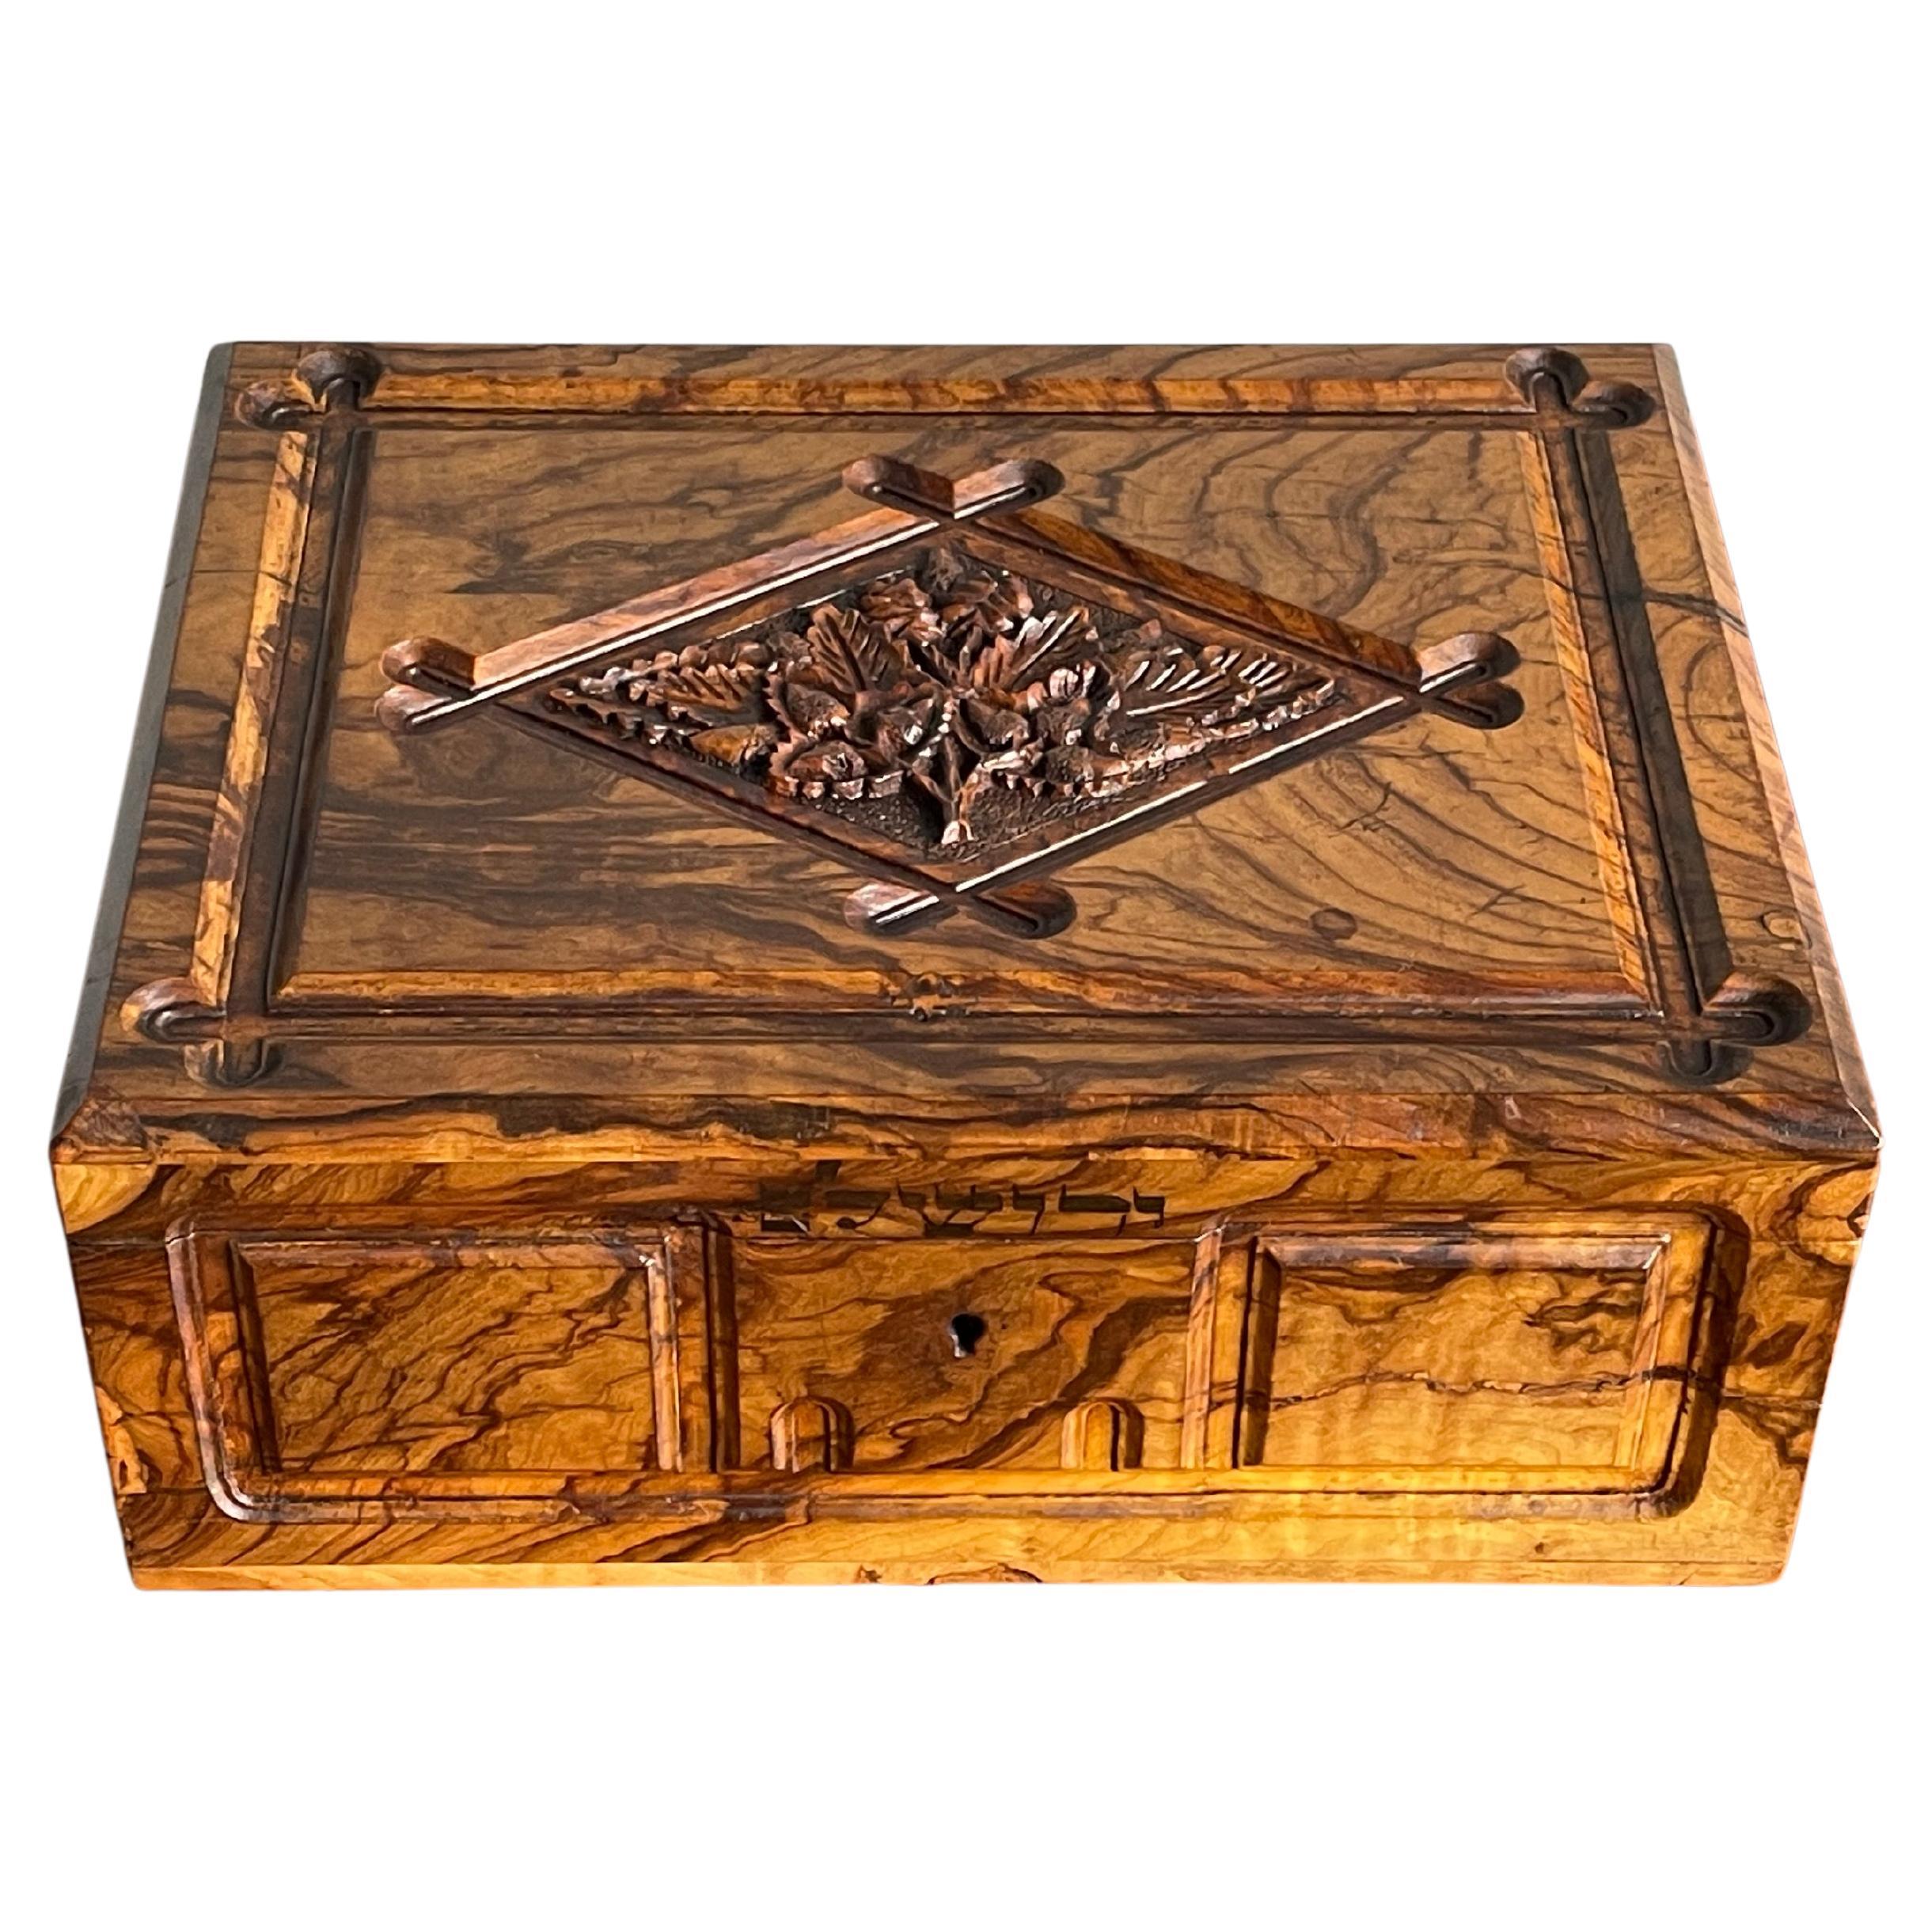 What is the best wood for a jewelry box?